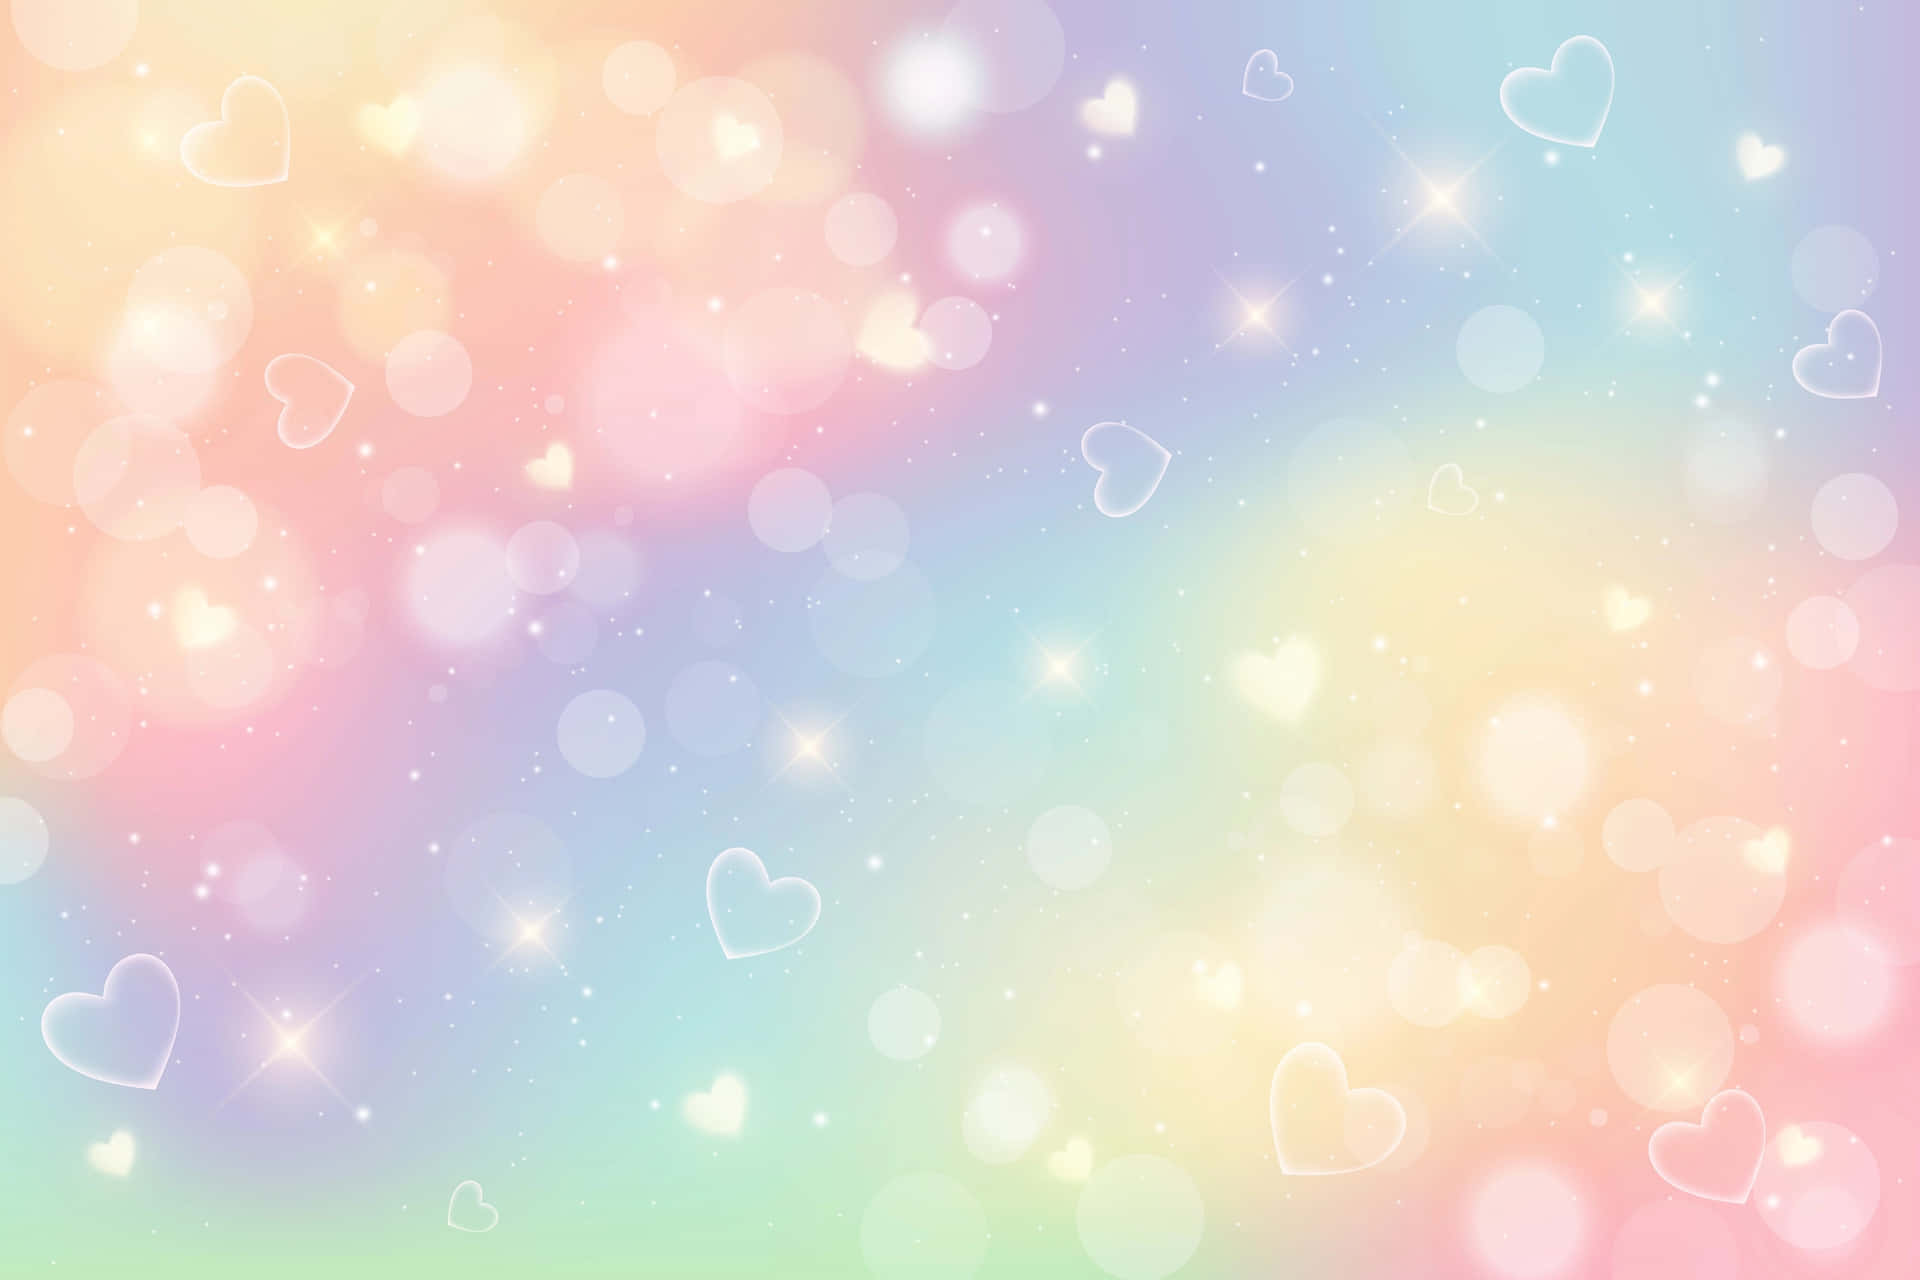 Refresh your heart and soul with this pastel cute background!